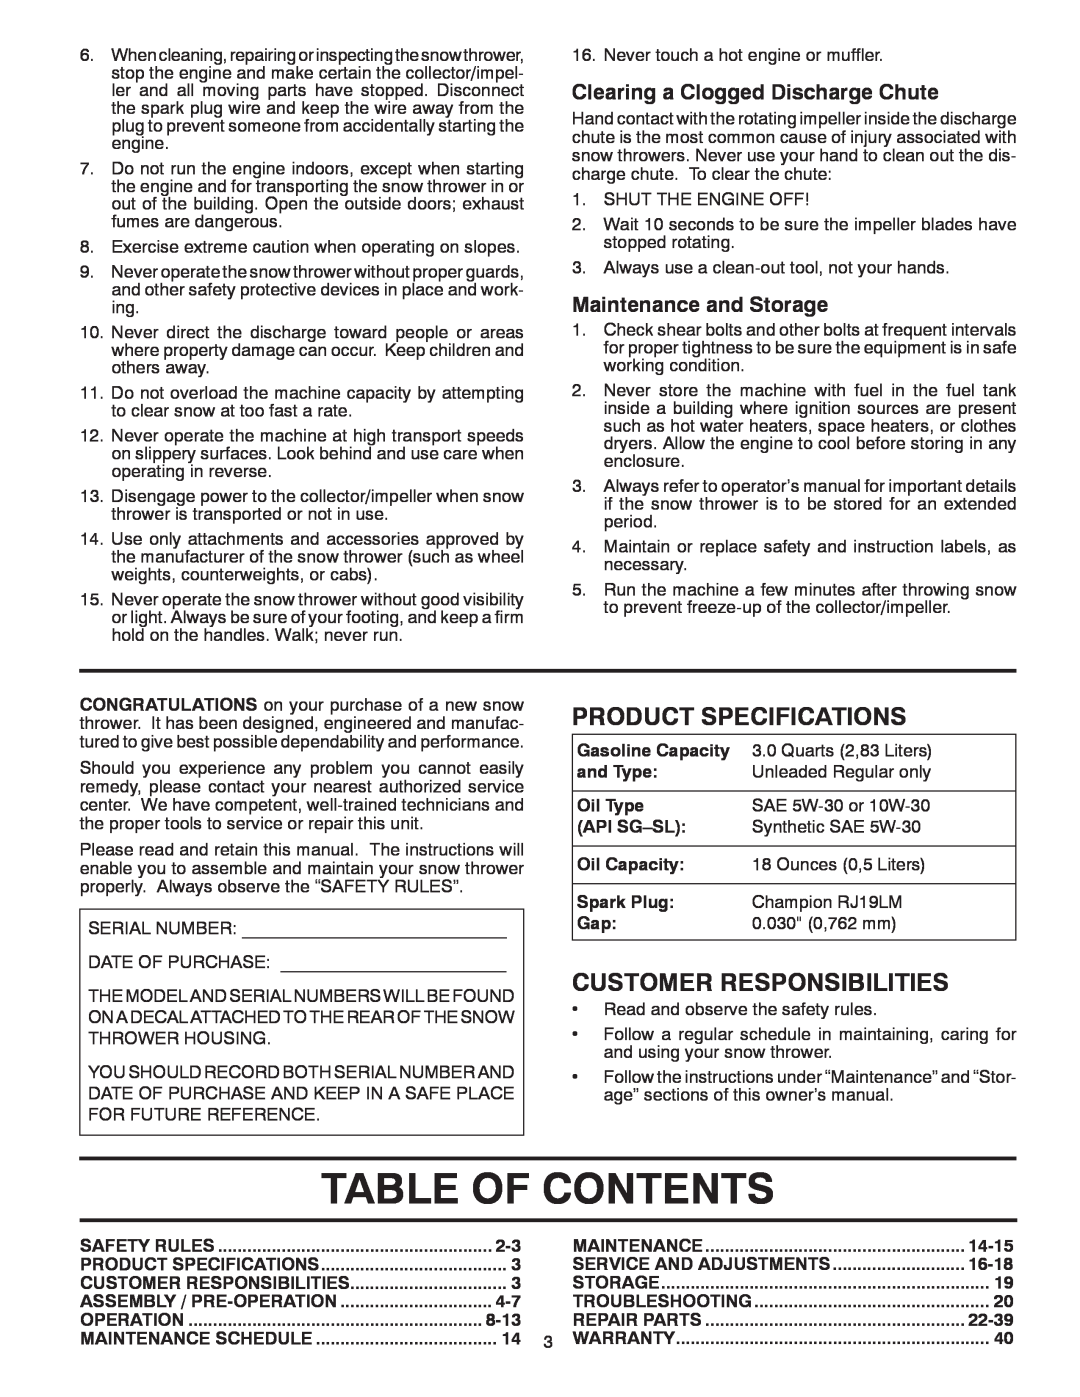 Poulan 96192003001 Table Of Contents, Product Specifications, Customer Responsibilities, Maintenance and Storage, and Type 